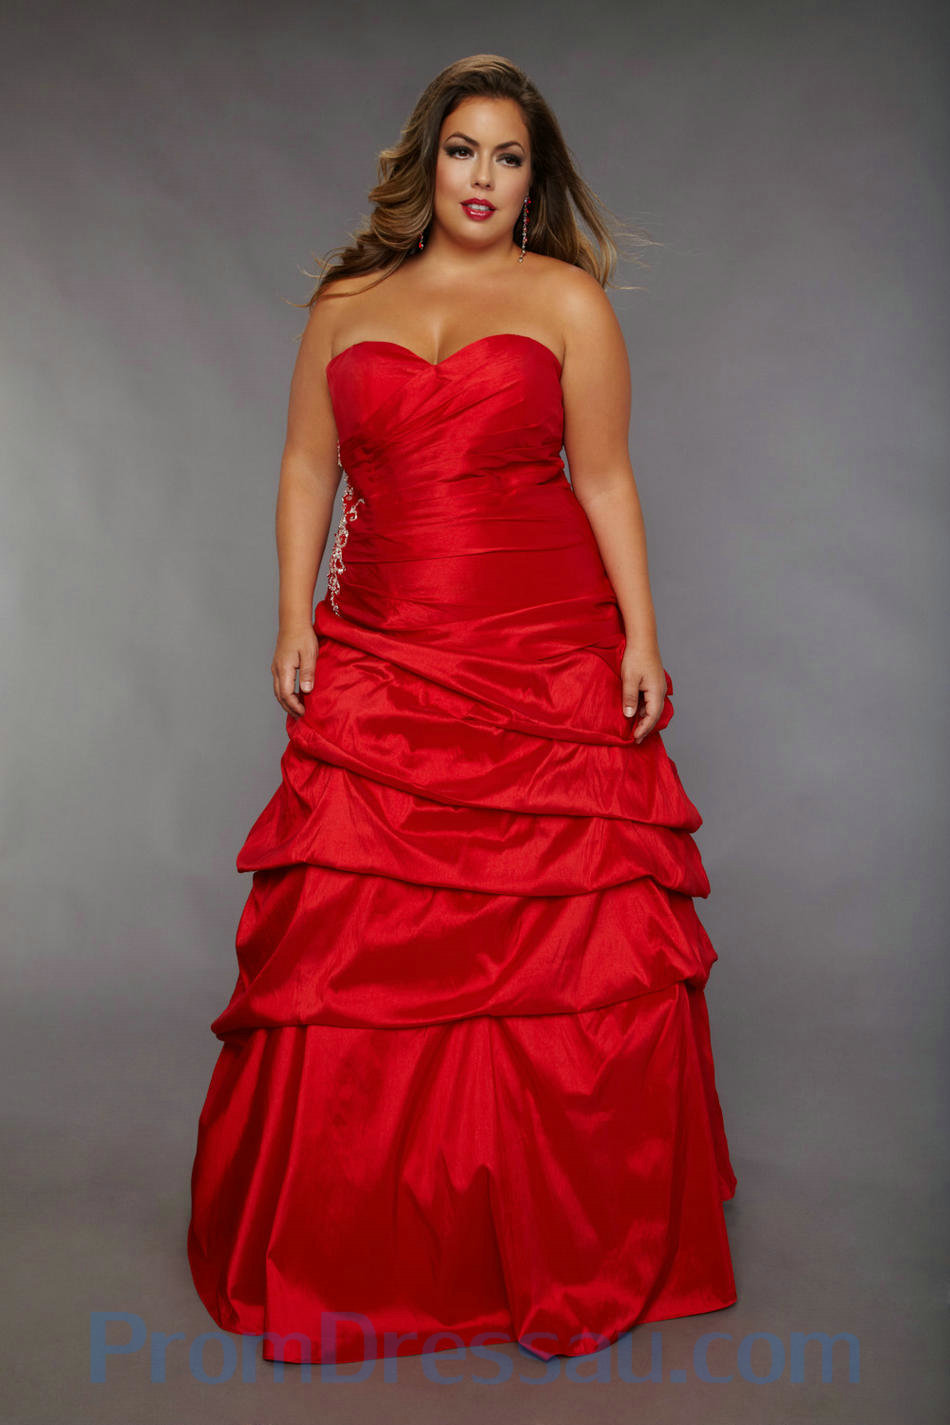 Plus Size Floor Length Evening Dresses And Review Clothing Brand